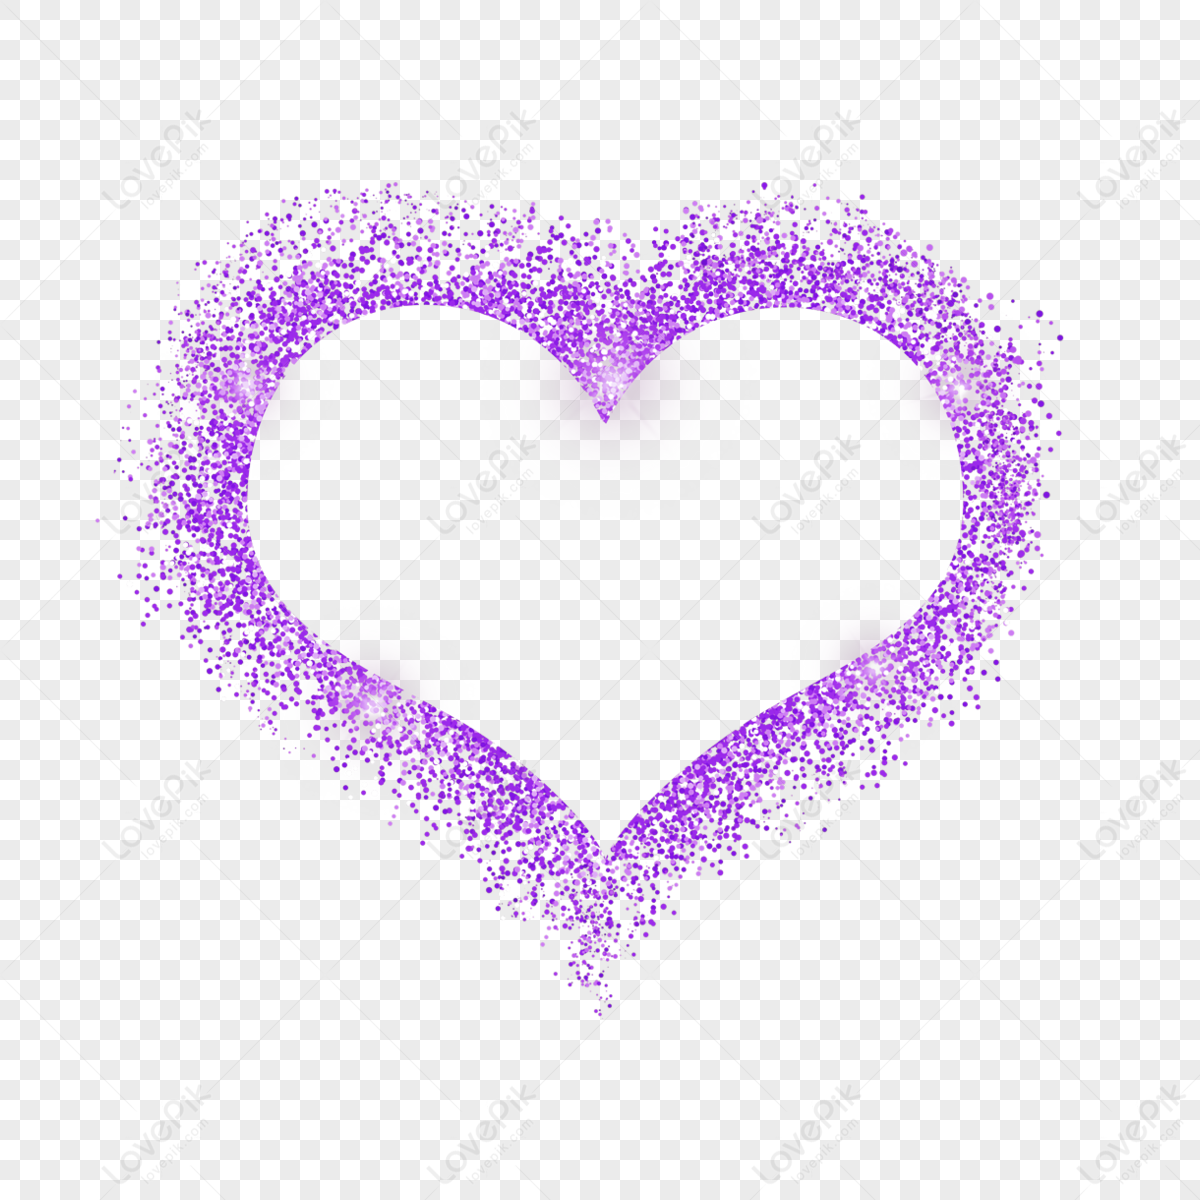 Purple Heart Shape PNG Images With Transparent Background | Free ...